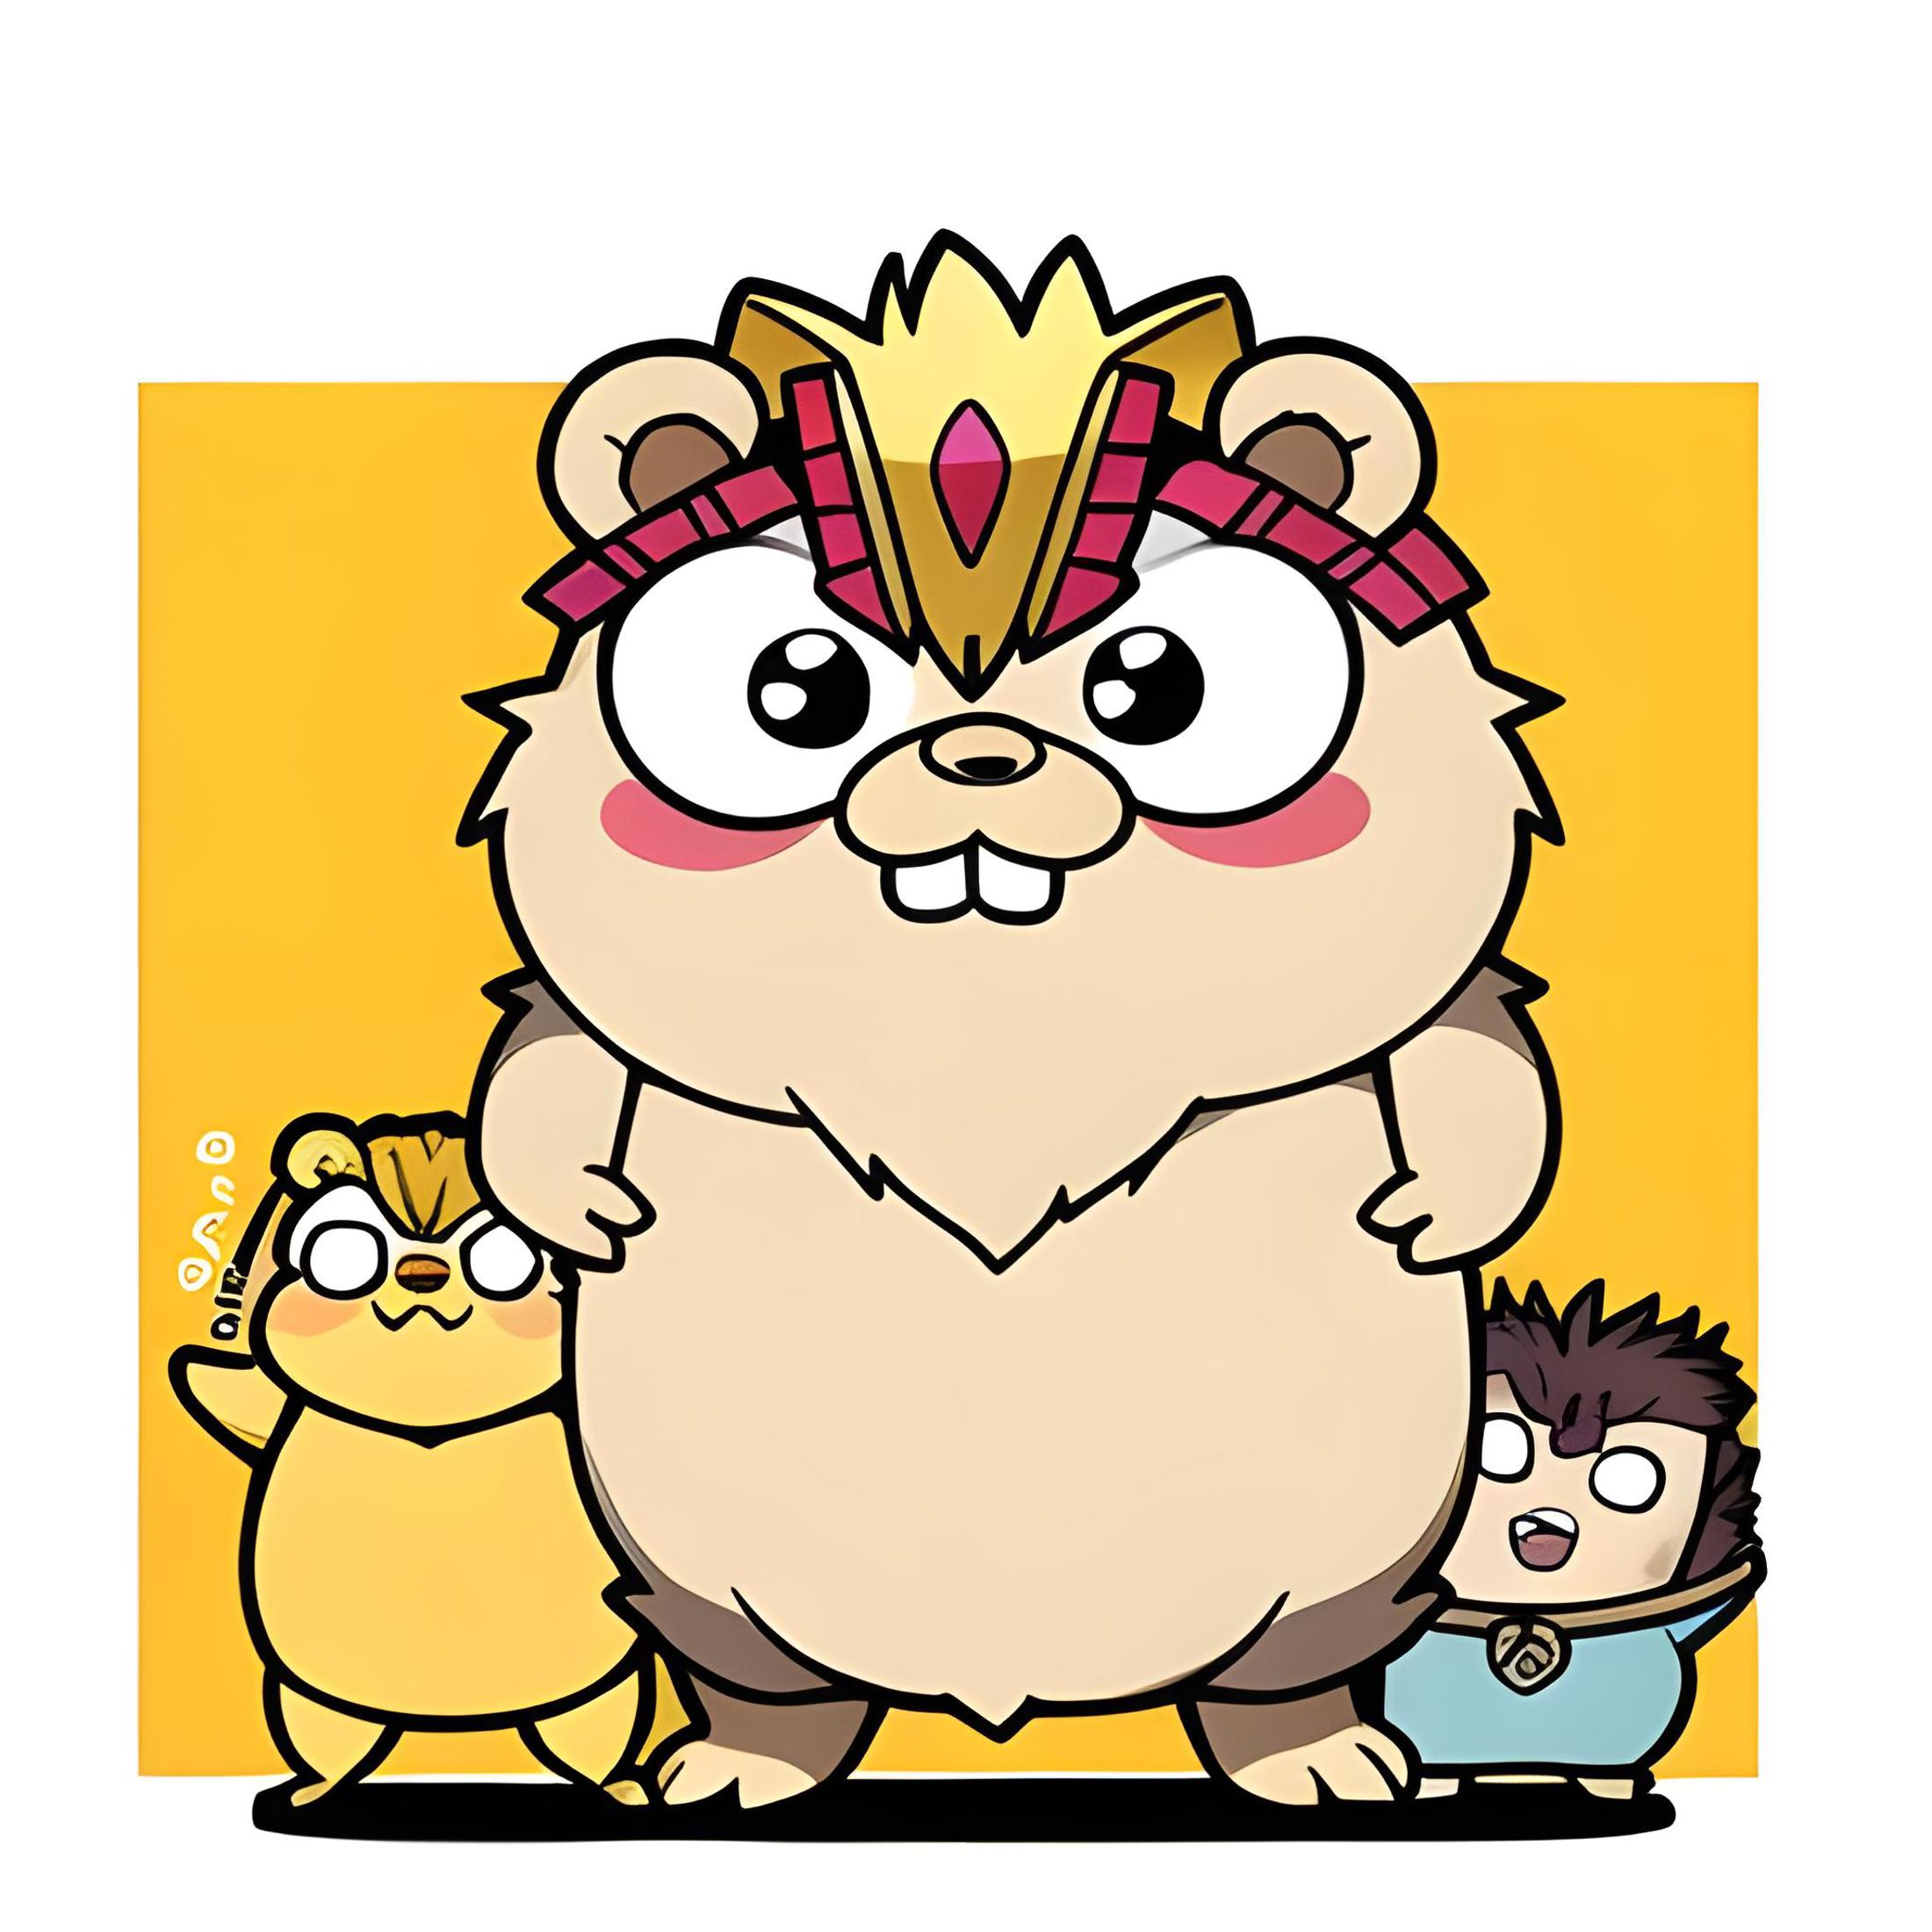 golang gopher image by rsteube